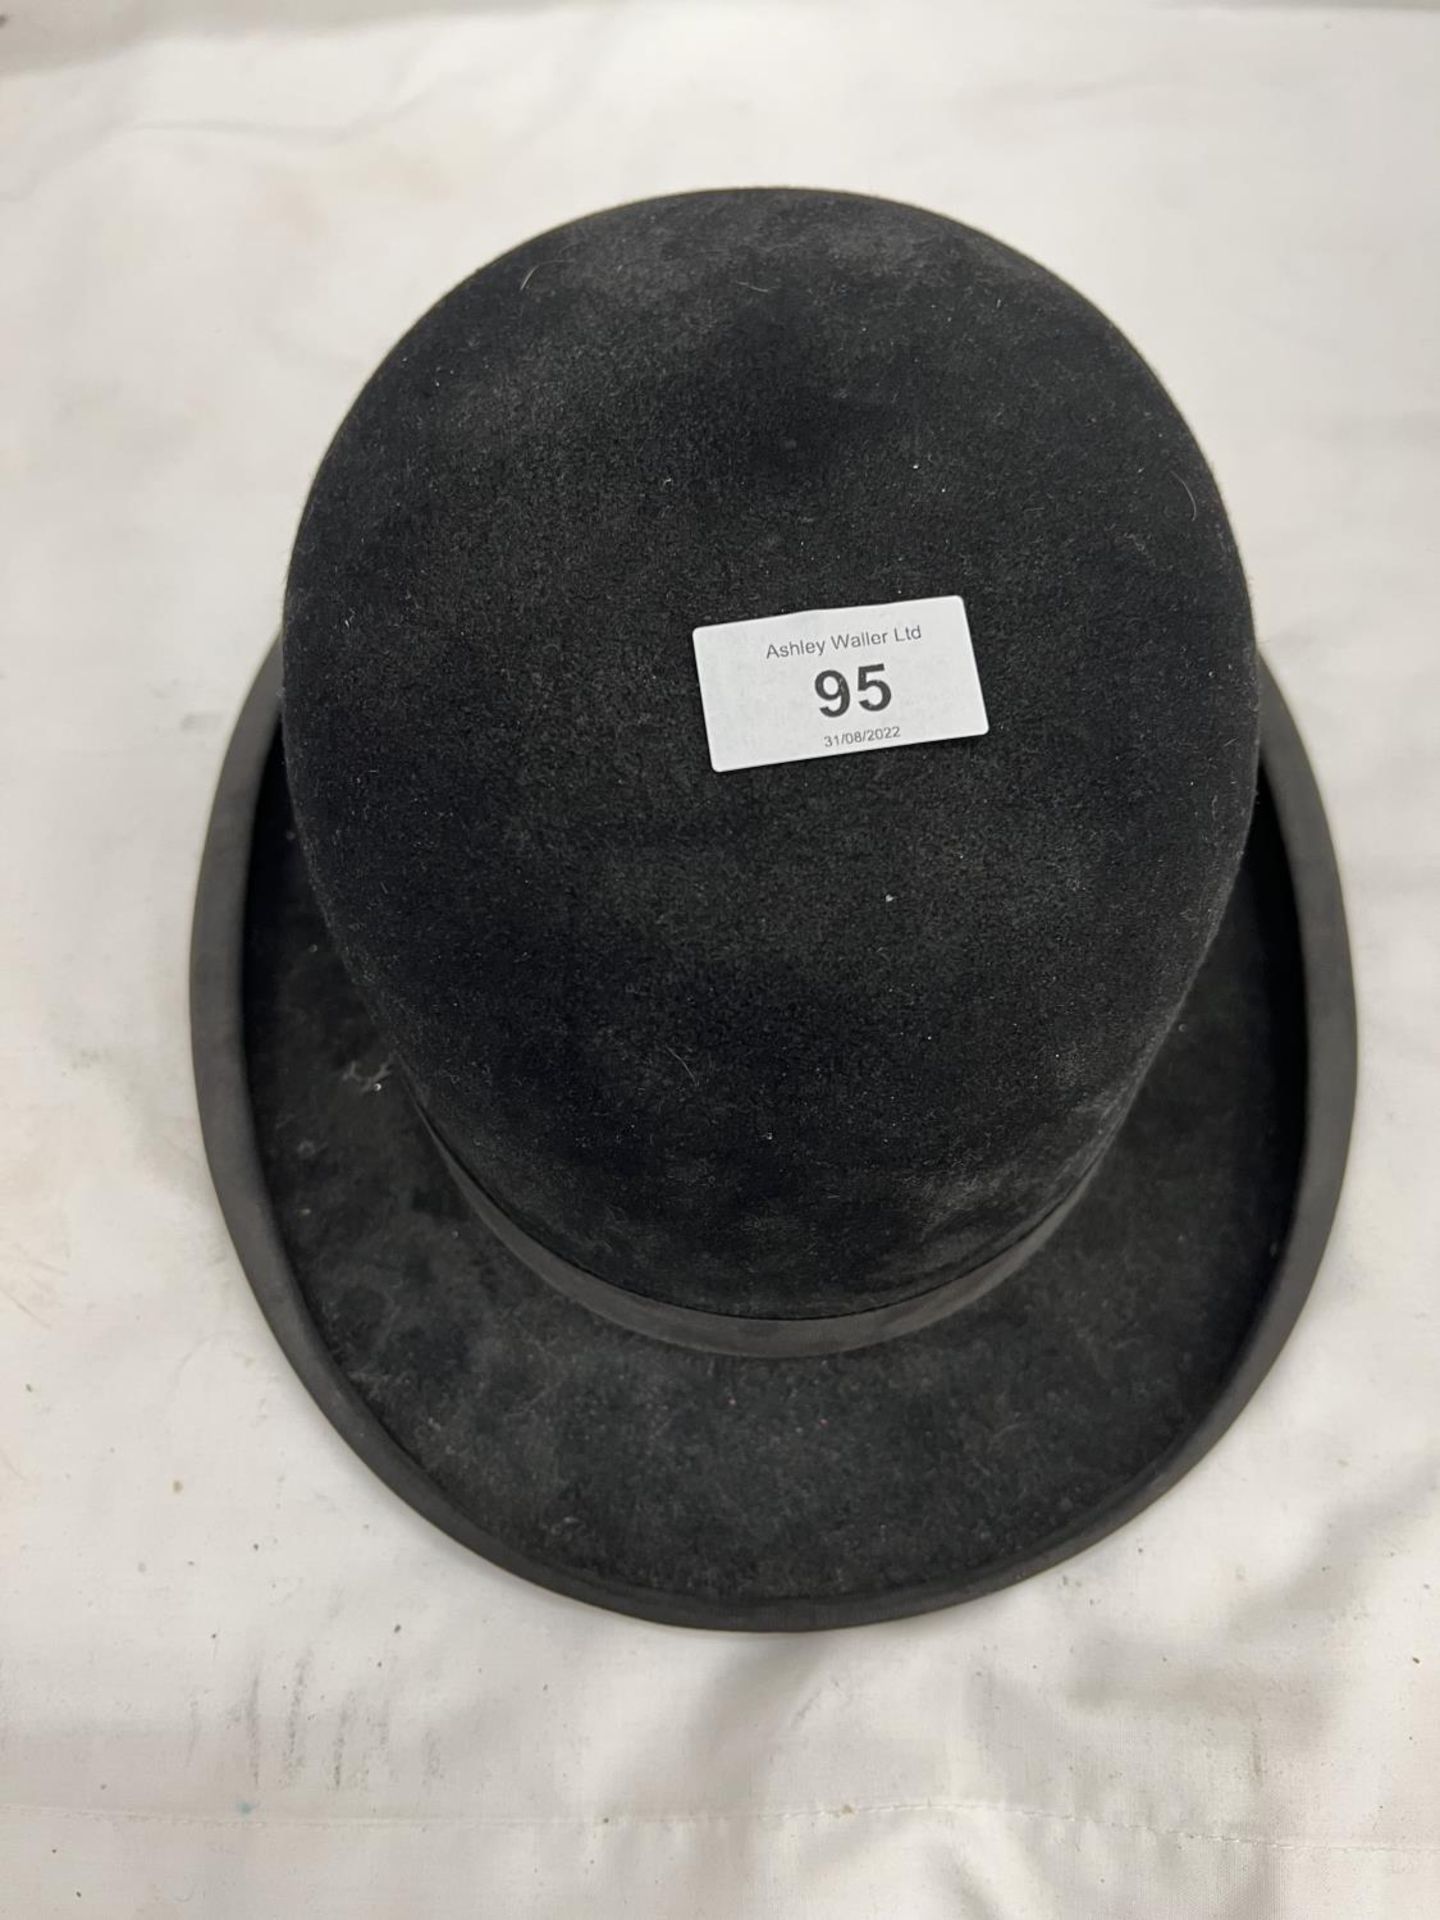 A VINTAGE G.A. DUNN & CO PICCADILLY CIRCUS LONDON BOWLER HAT. SIZE: 8 1/4" INTERNAL LENGTH